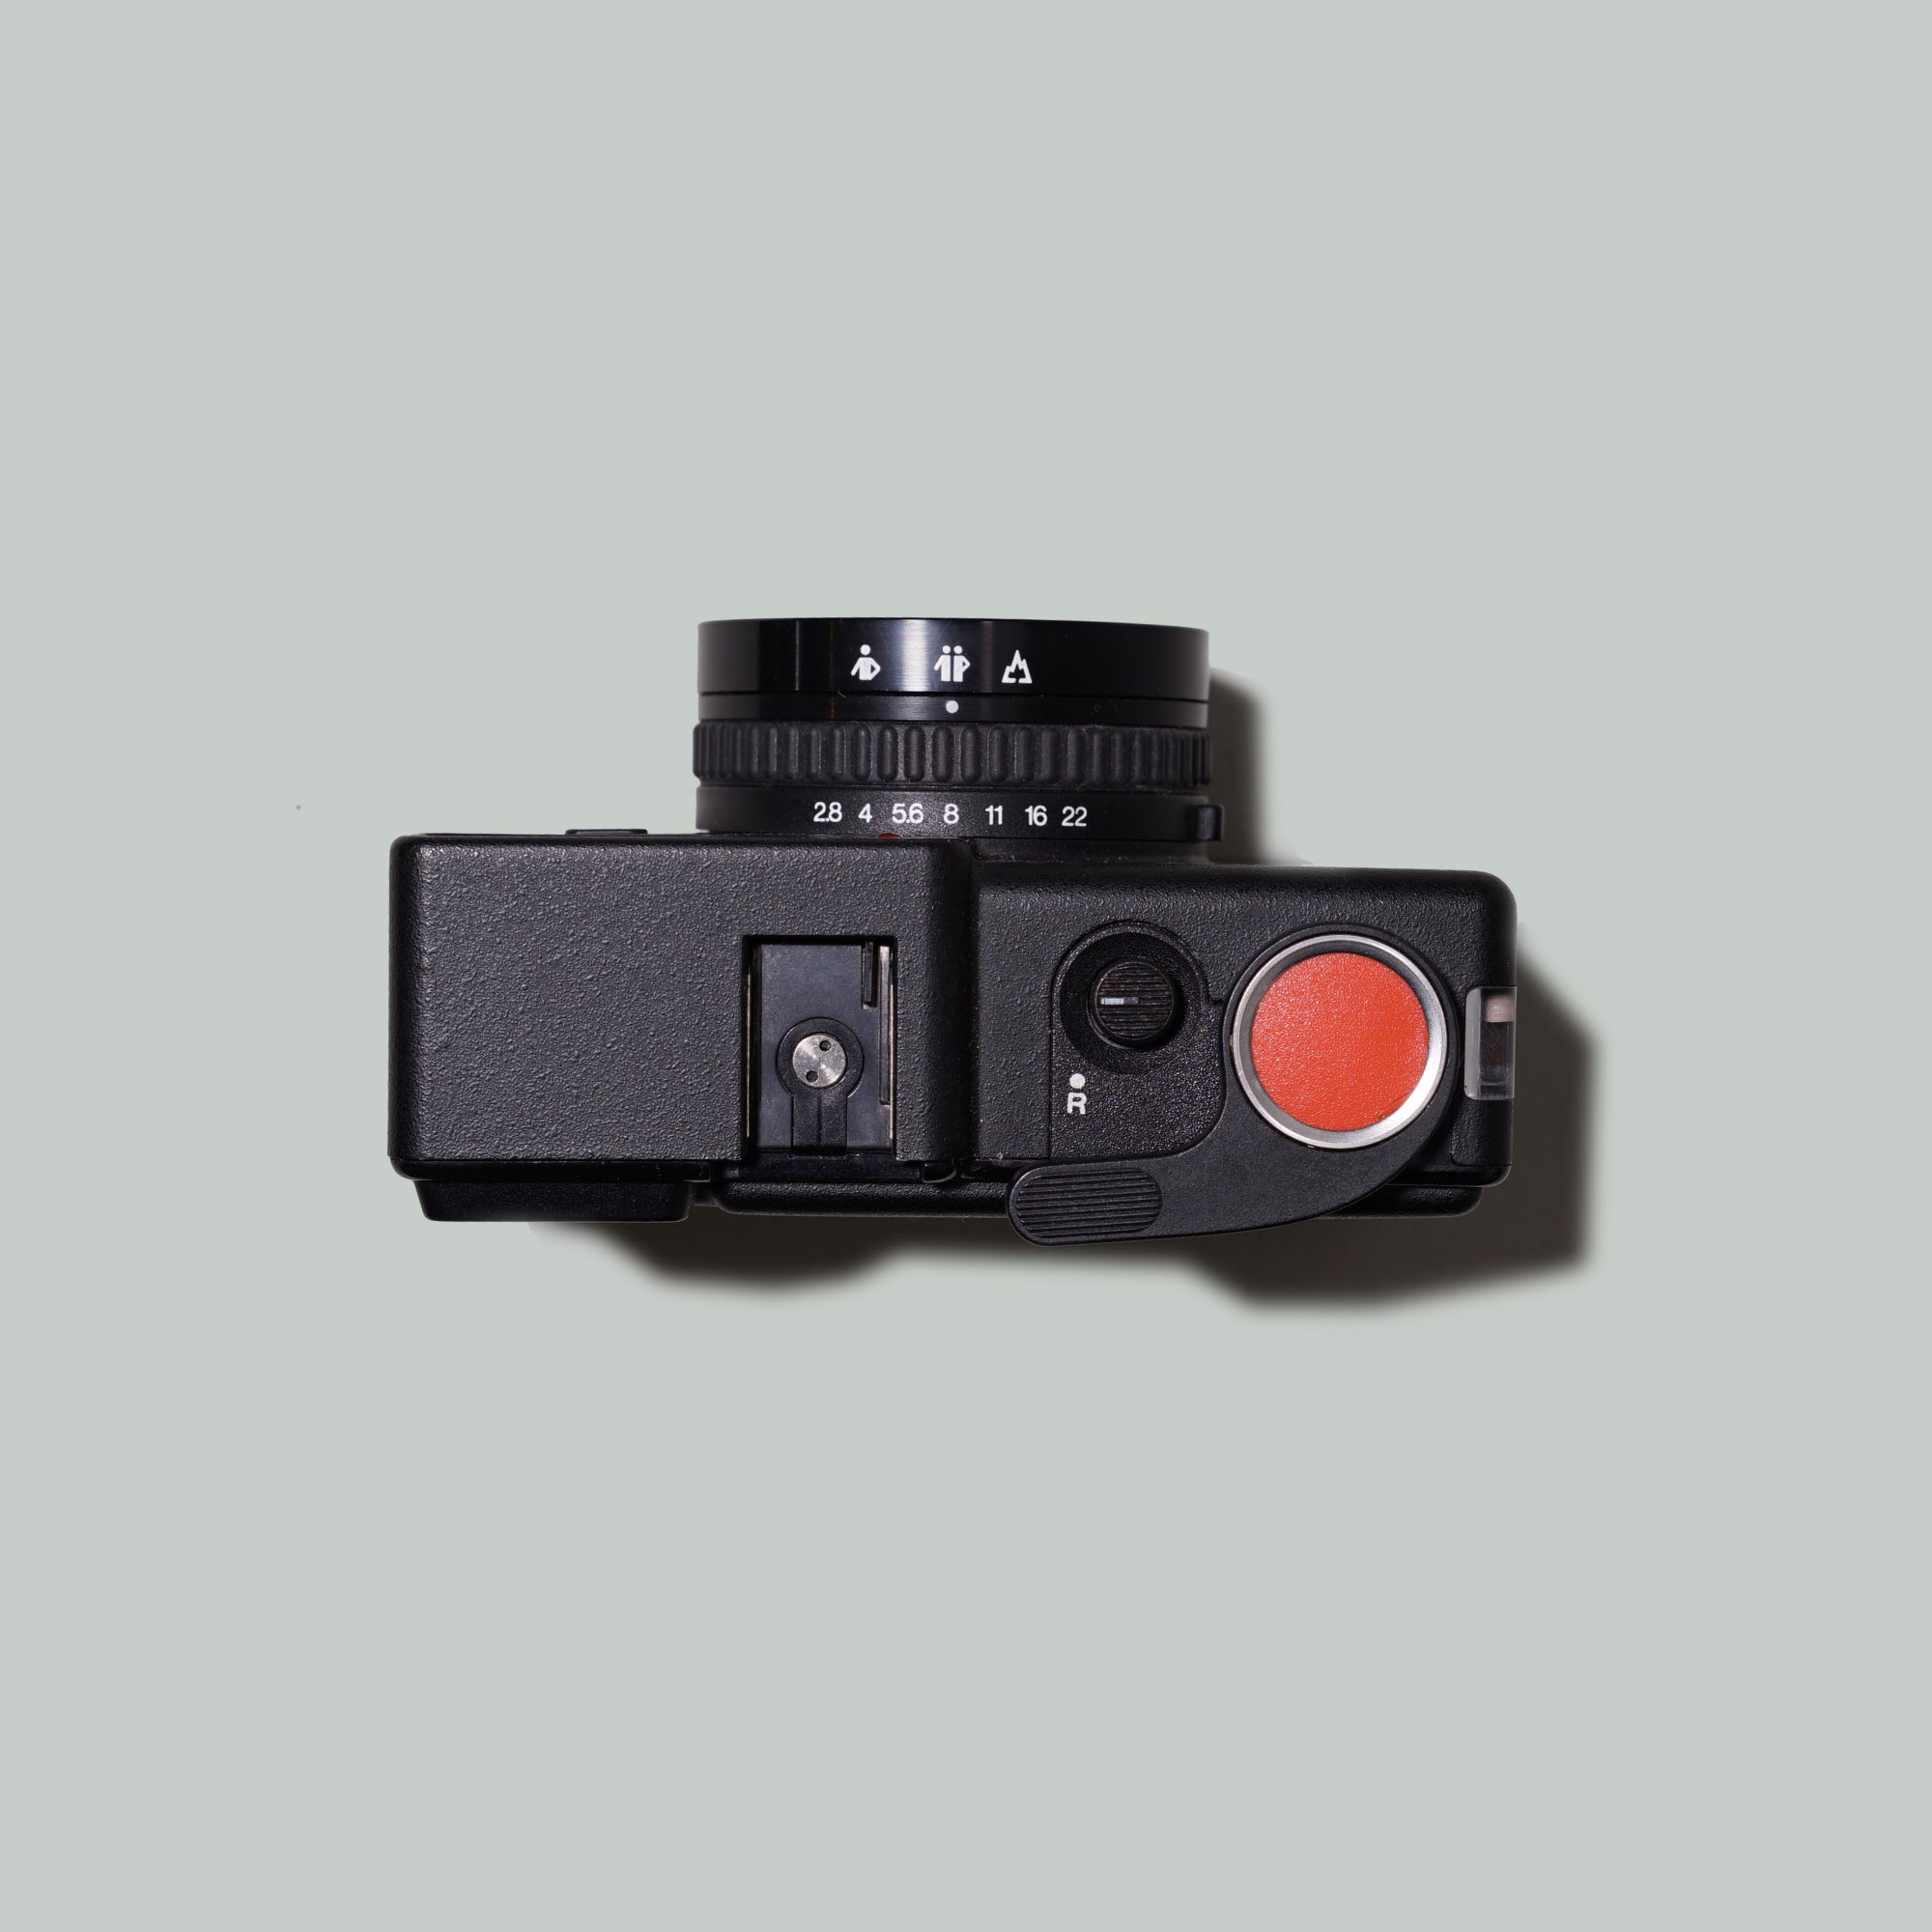 Buy AGFA Optima 1035 + Optima Lux now at Analogue Amsterdam